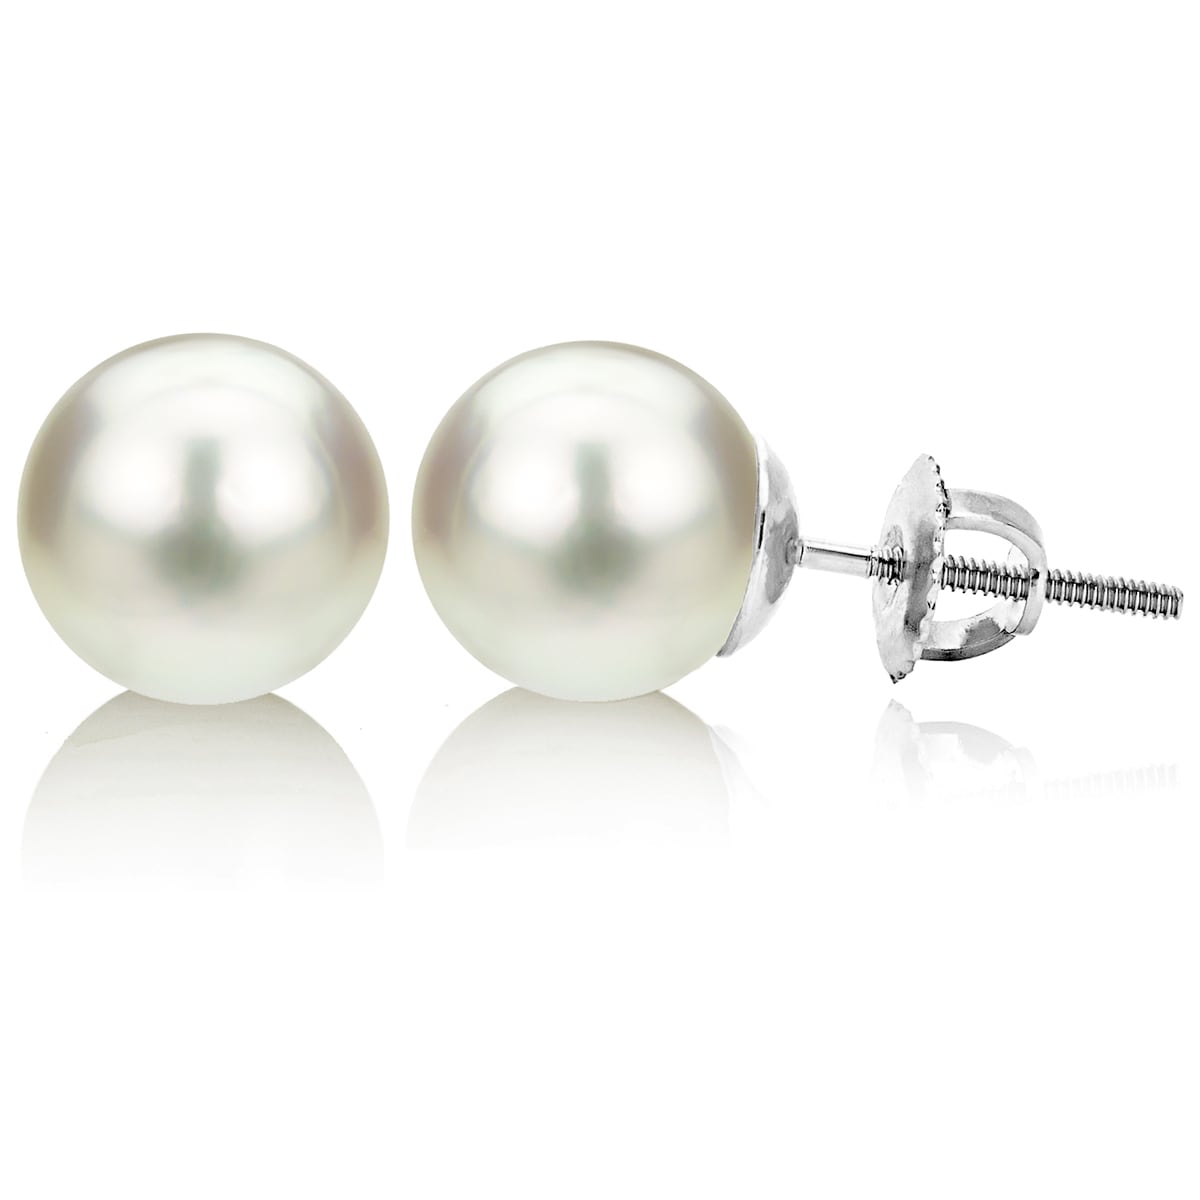 Quality Round White Cultured Akoya Stud Pearl Earrings Set for Women FREELIGHT 14K Gold AAA 